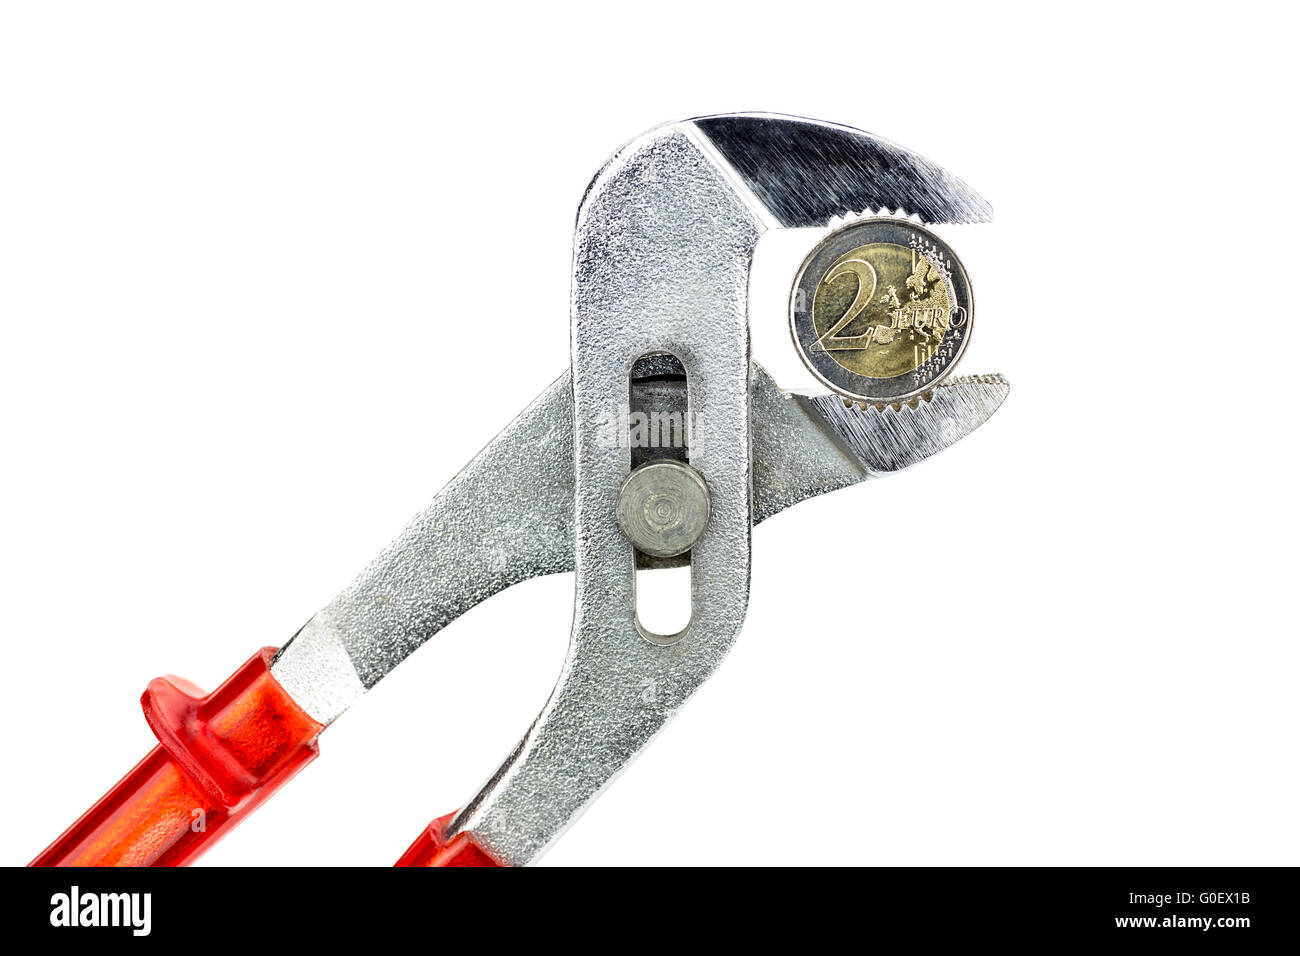 Water pump pliers holding two euro coin on white b Stock Photo